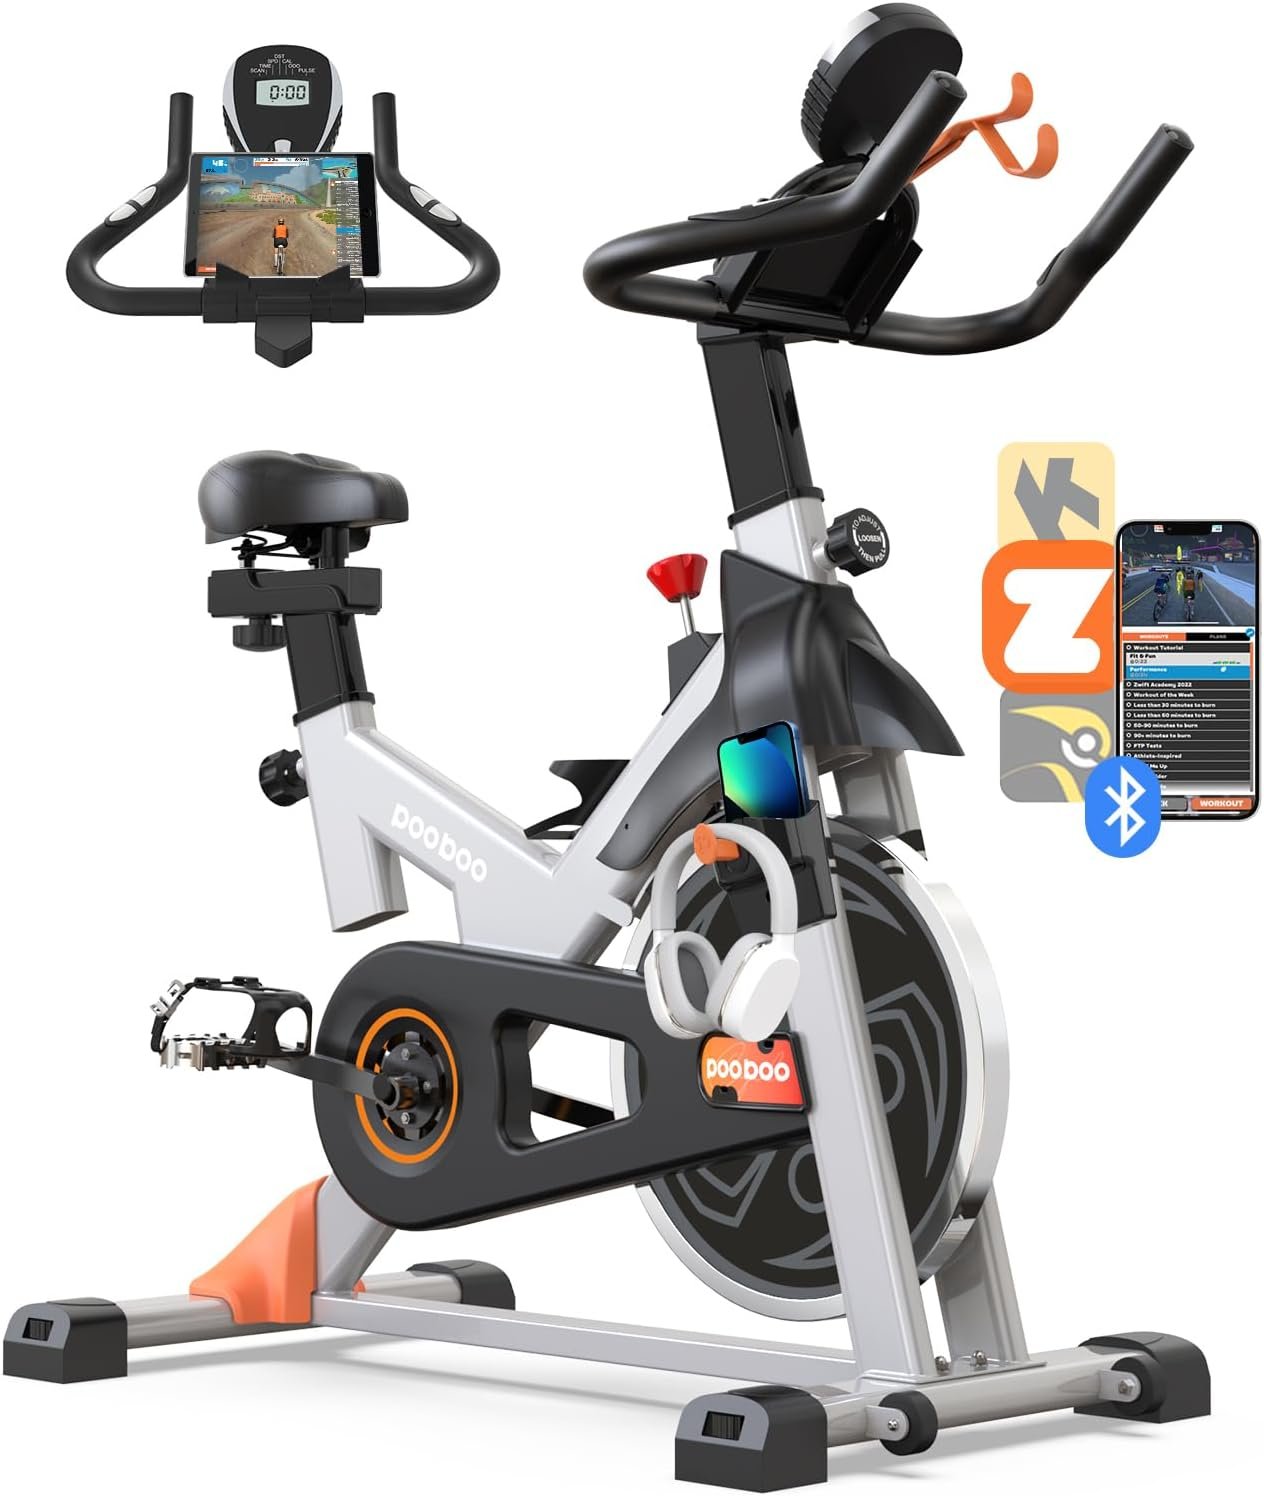 Pooboo Magnetic Resistance Bike Review